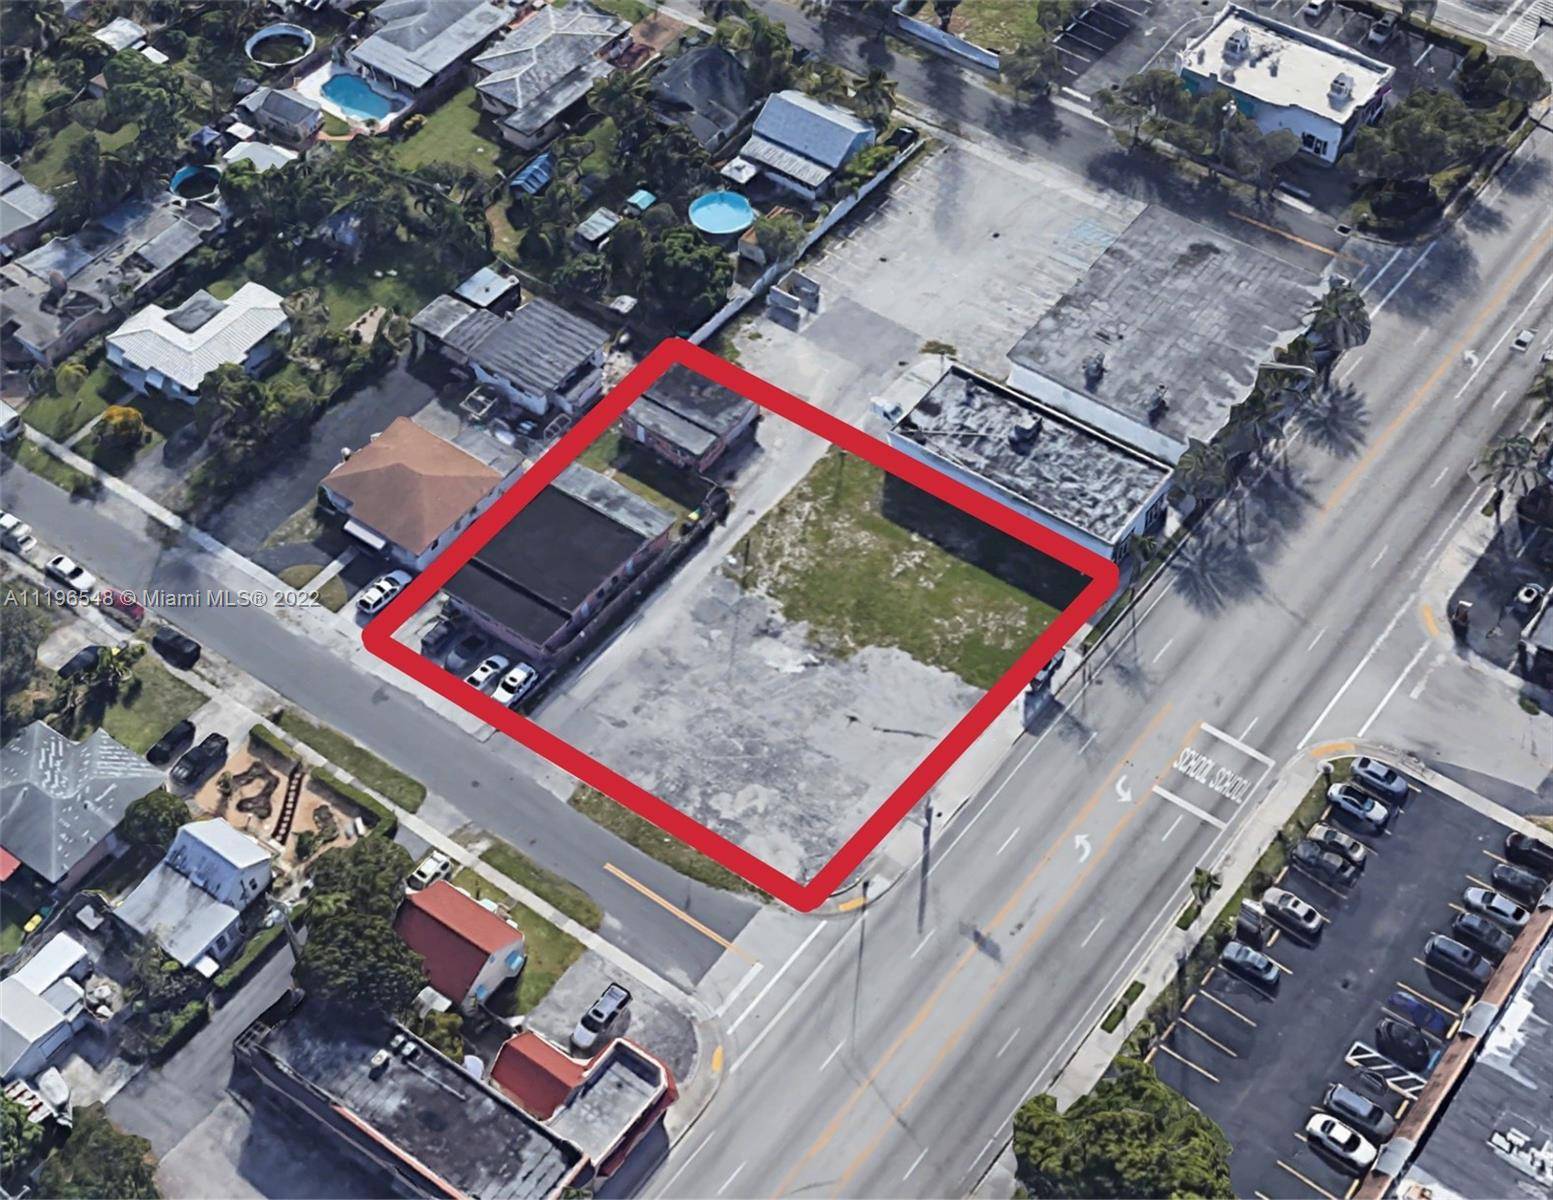 The subject offering includes three parcels of land totaling 19, 974 square feet.